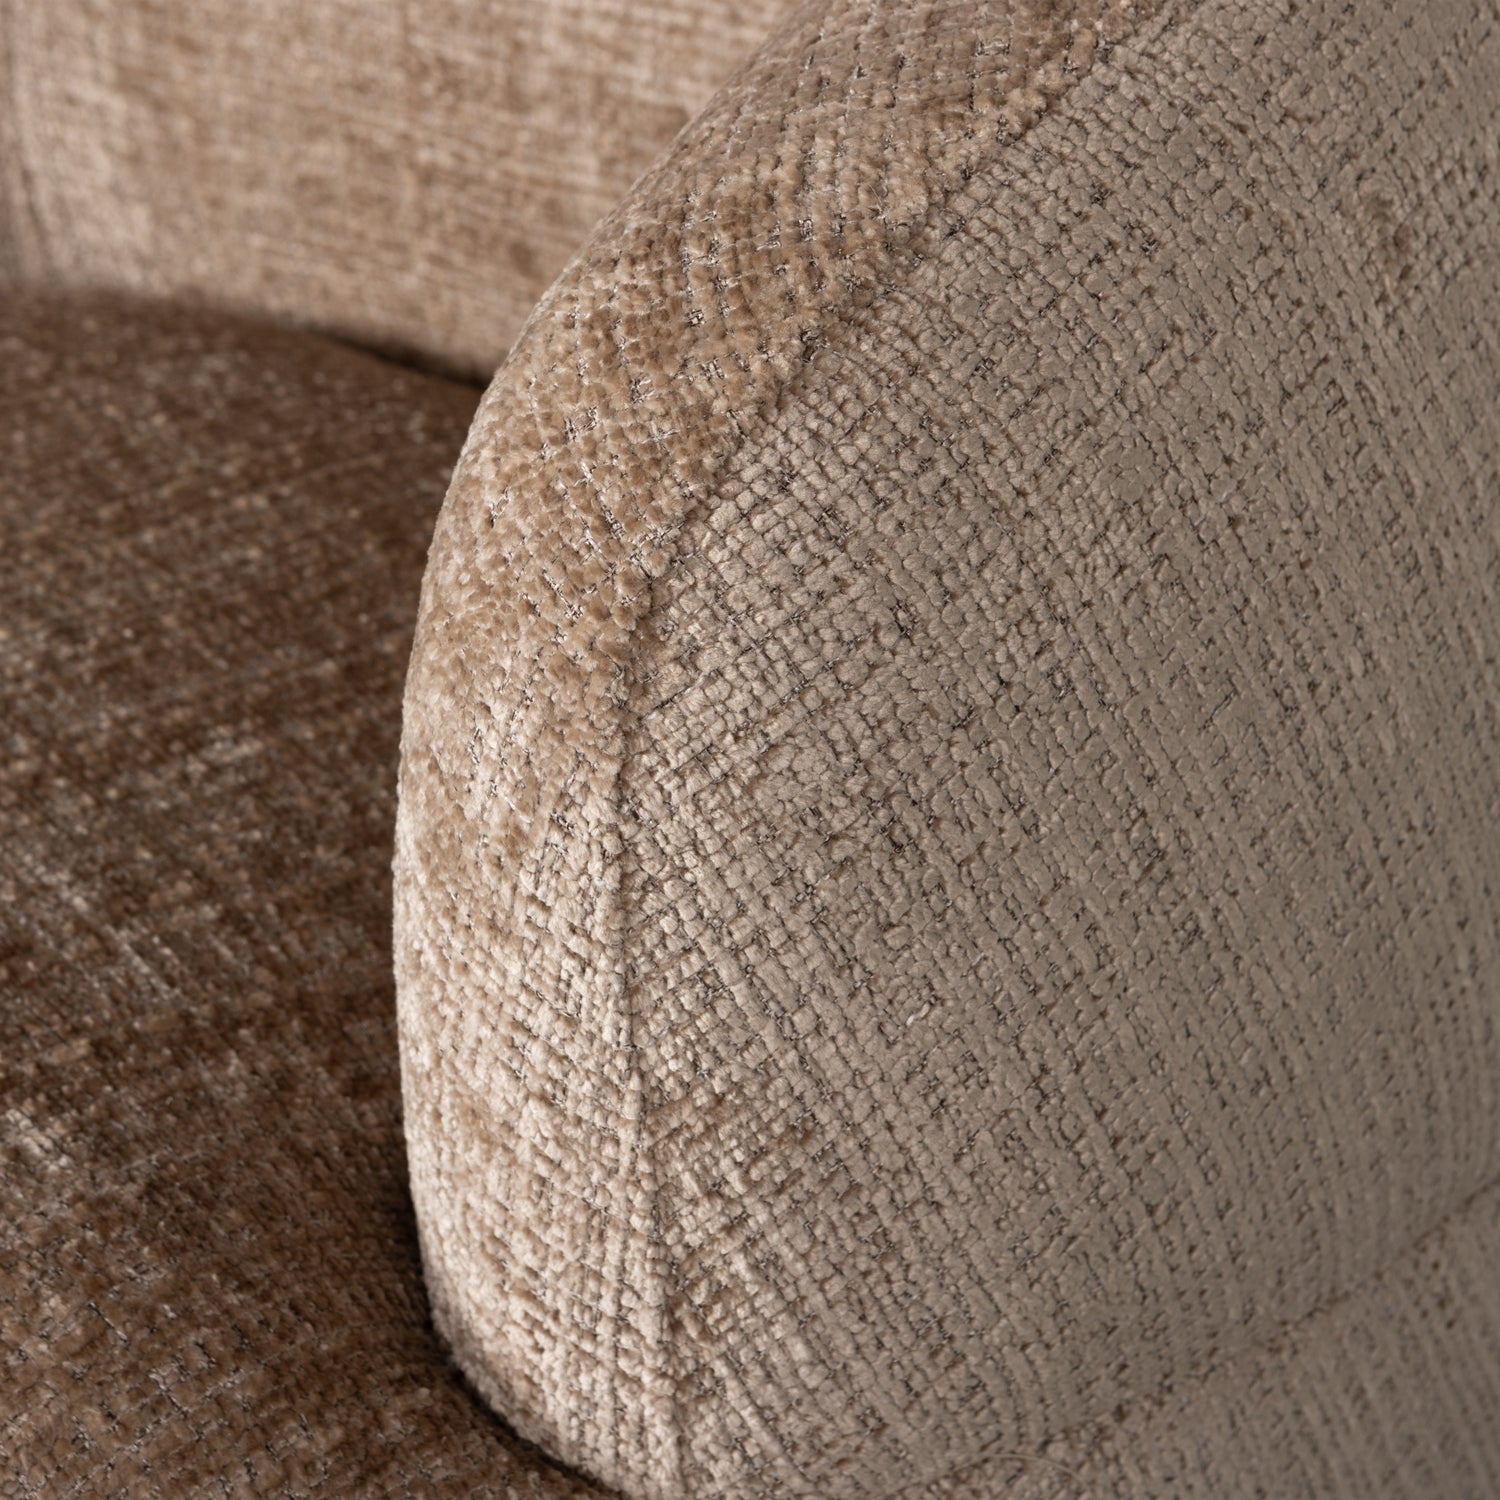 800037-S-02_VS_FA_Woolly_draaifauteuil_chenille_zand_detail.png?auto=webp&format=png&width=1500&height=1500